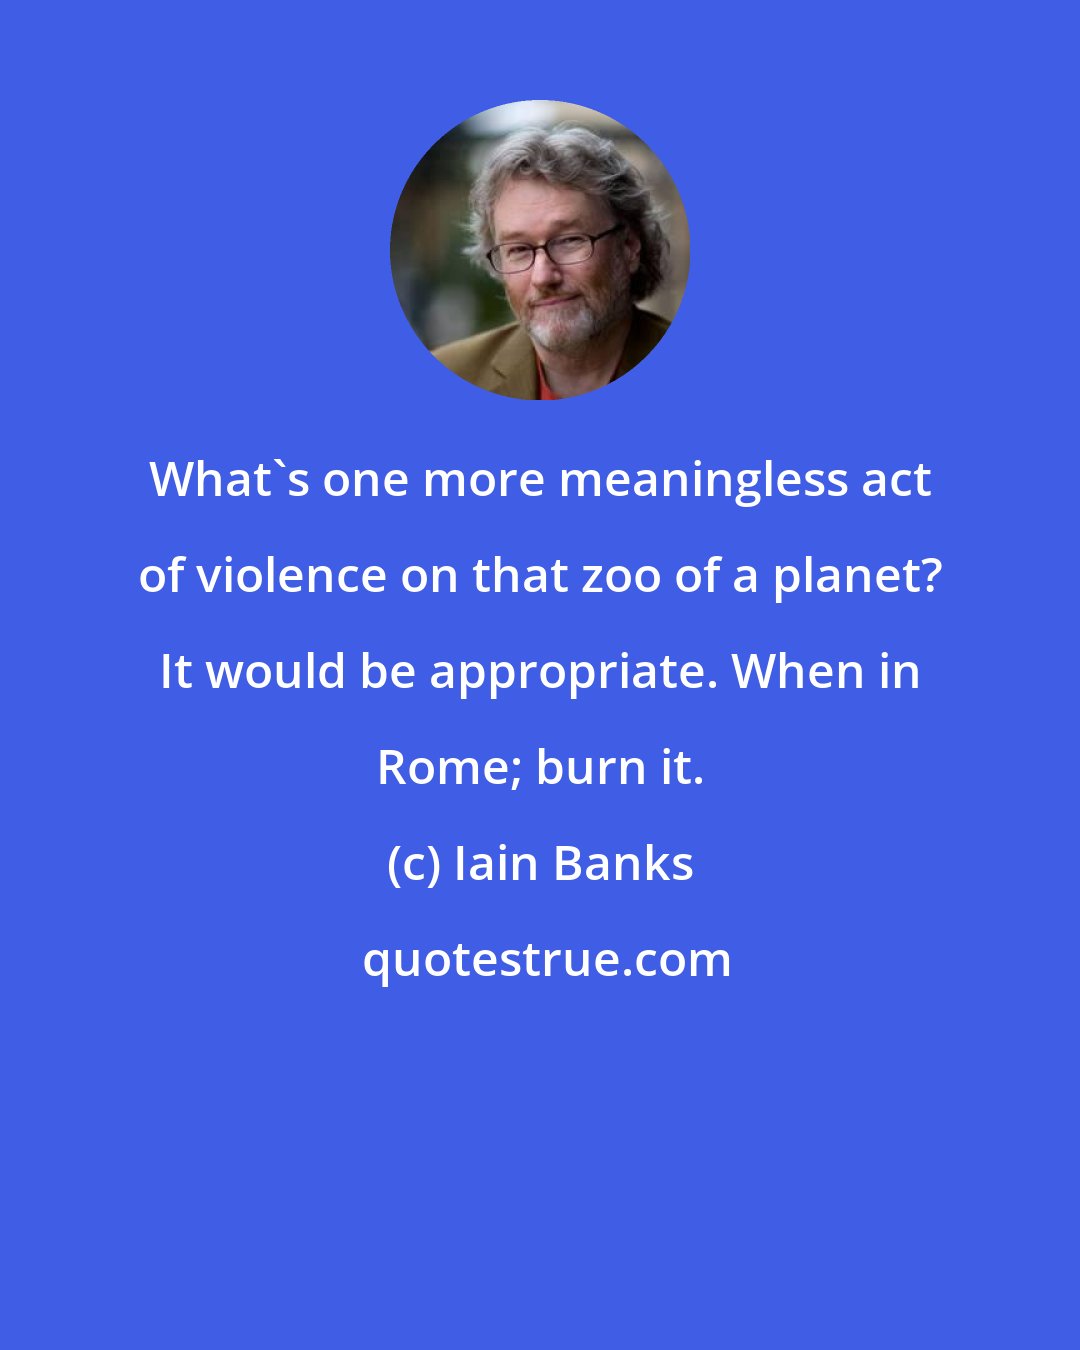 Iain Banks: What's one more meaningless act of violence on that zoo of a planet? It would be appropriate. When in Rome; burn it.